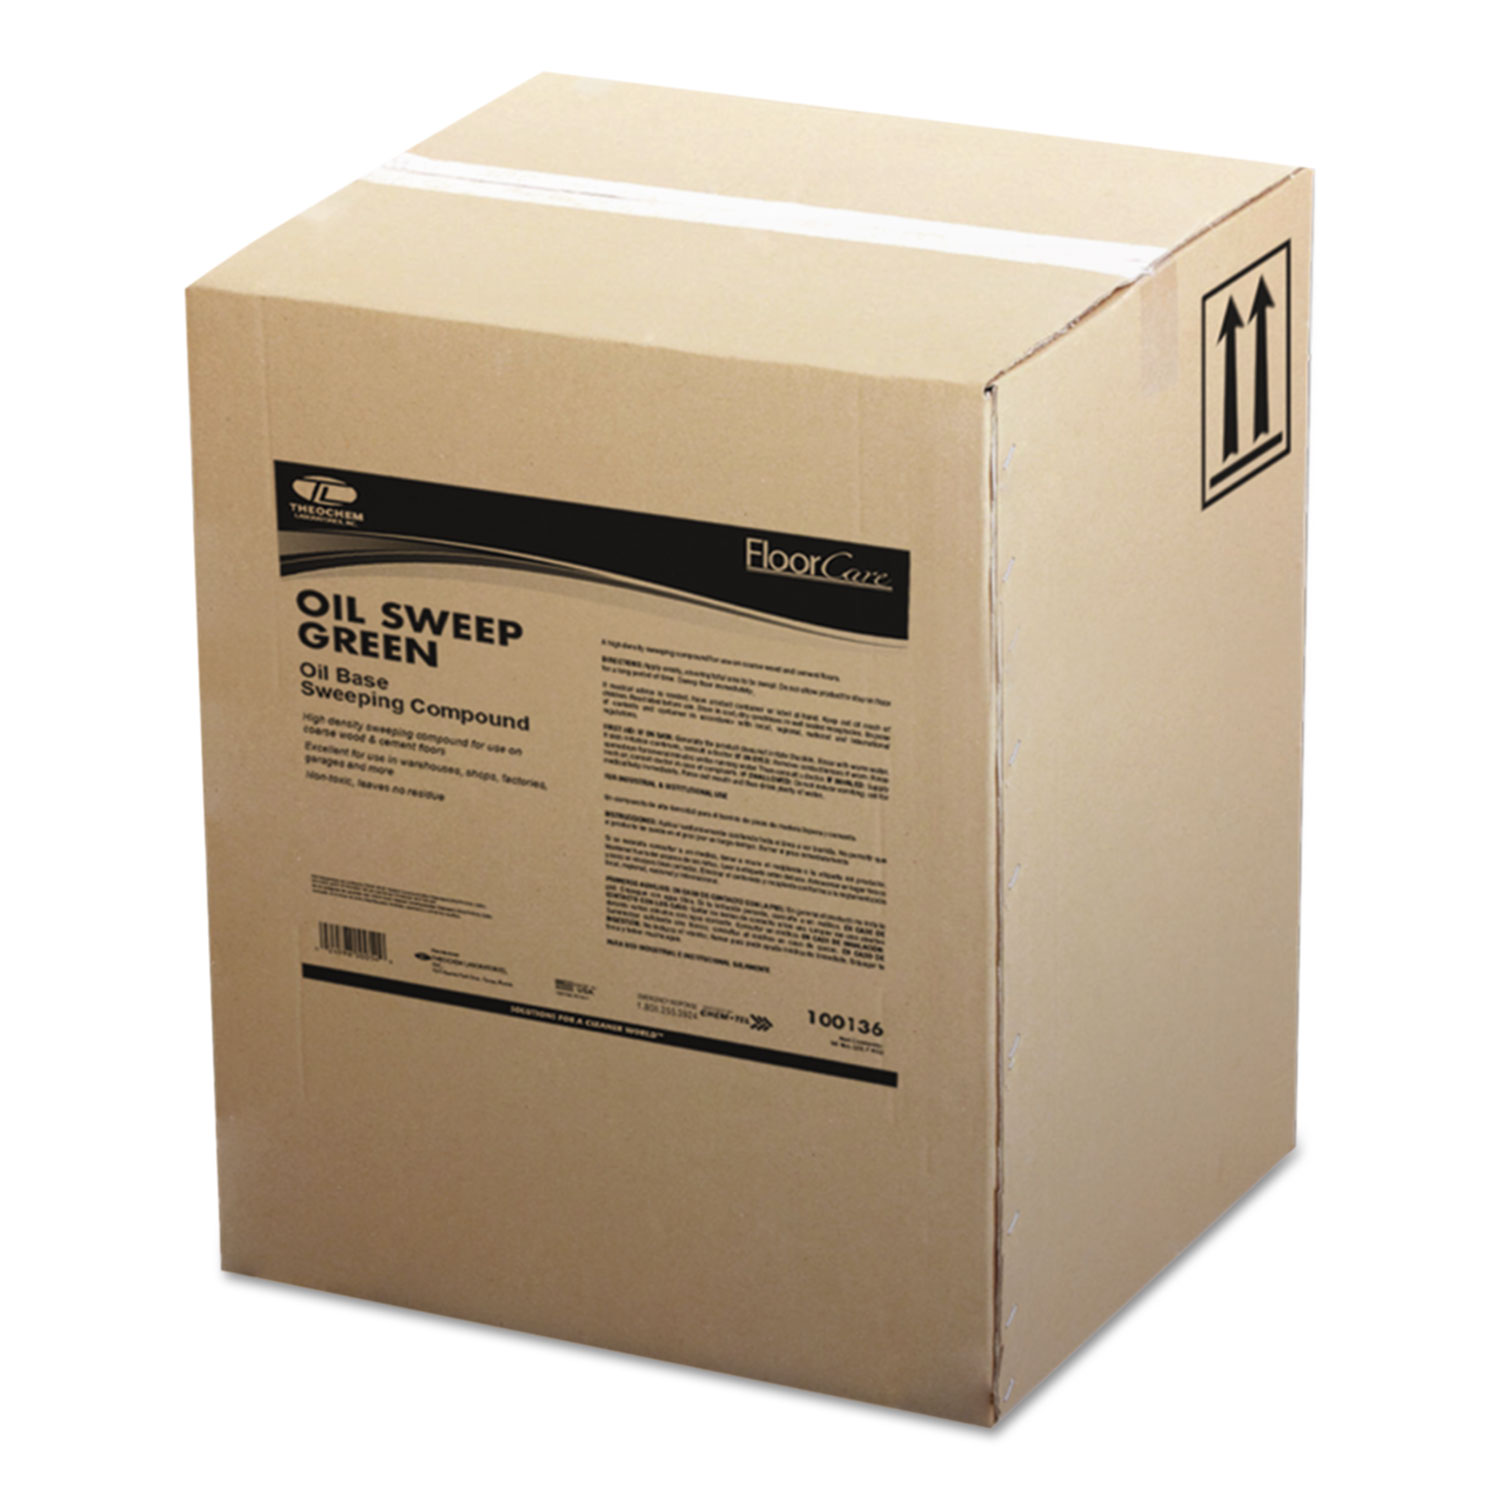  Theochem Laboratories 500050 Oil-Based Sweeping Compound, Grit-Free, 100lbs, Box (TOL3136100BX) 